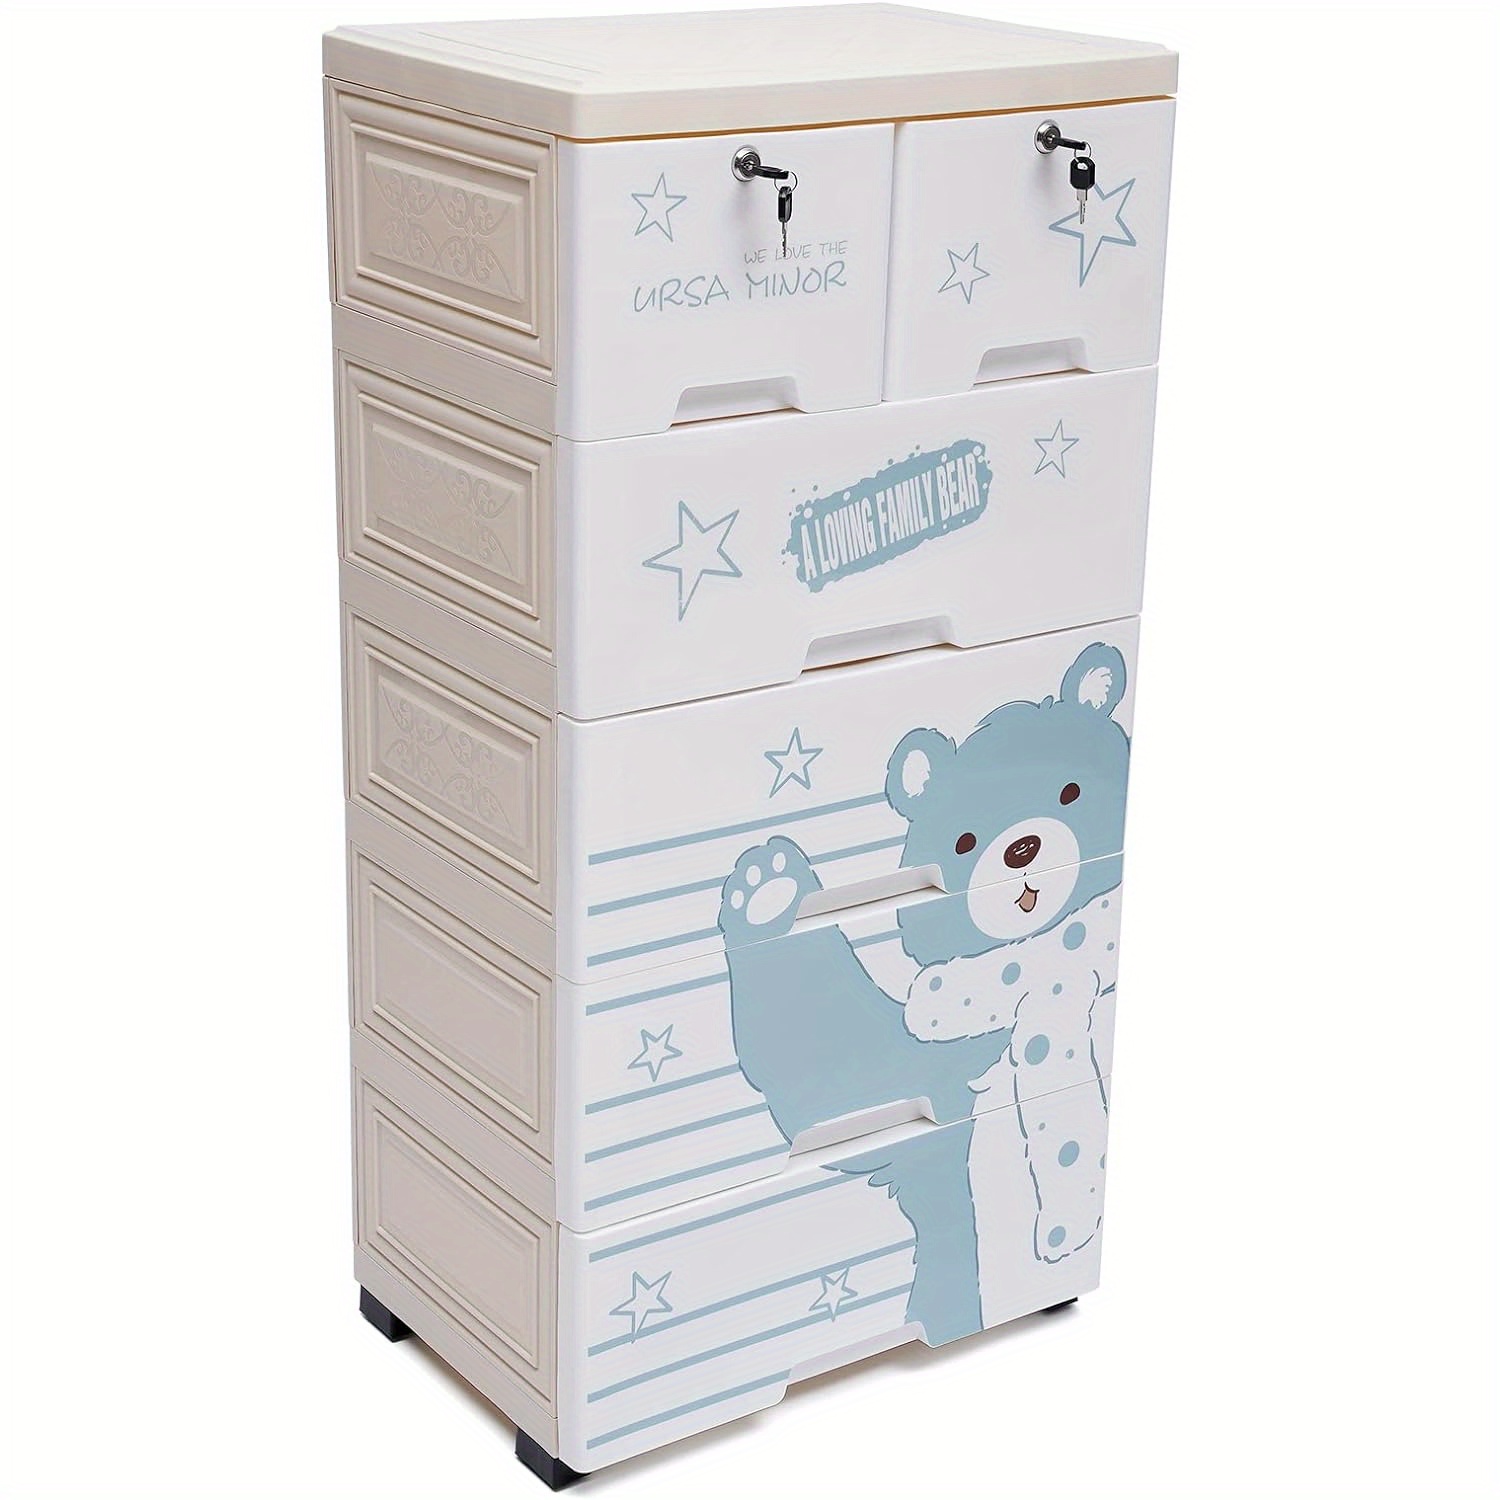 

Plastic Drawers Dresser, Storage Cabinet With 6 Drawers, Closet Drawers Tall Standing Dresser Bedside Furniture & Night Stand End Table Dresser (19.69 * 13.78 * 40.16in, Style Bear)